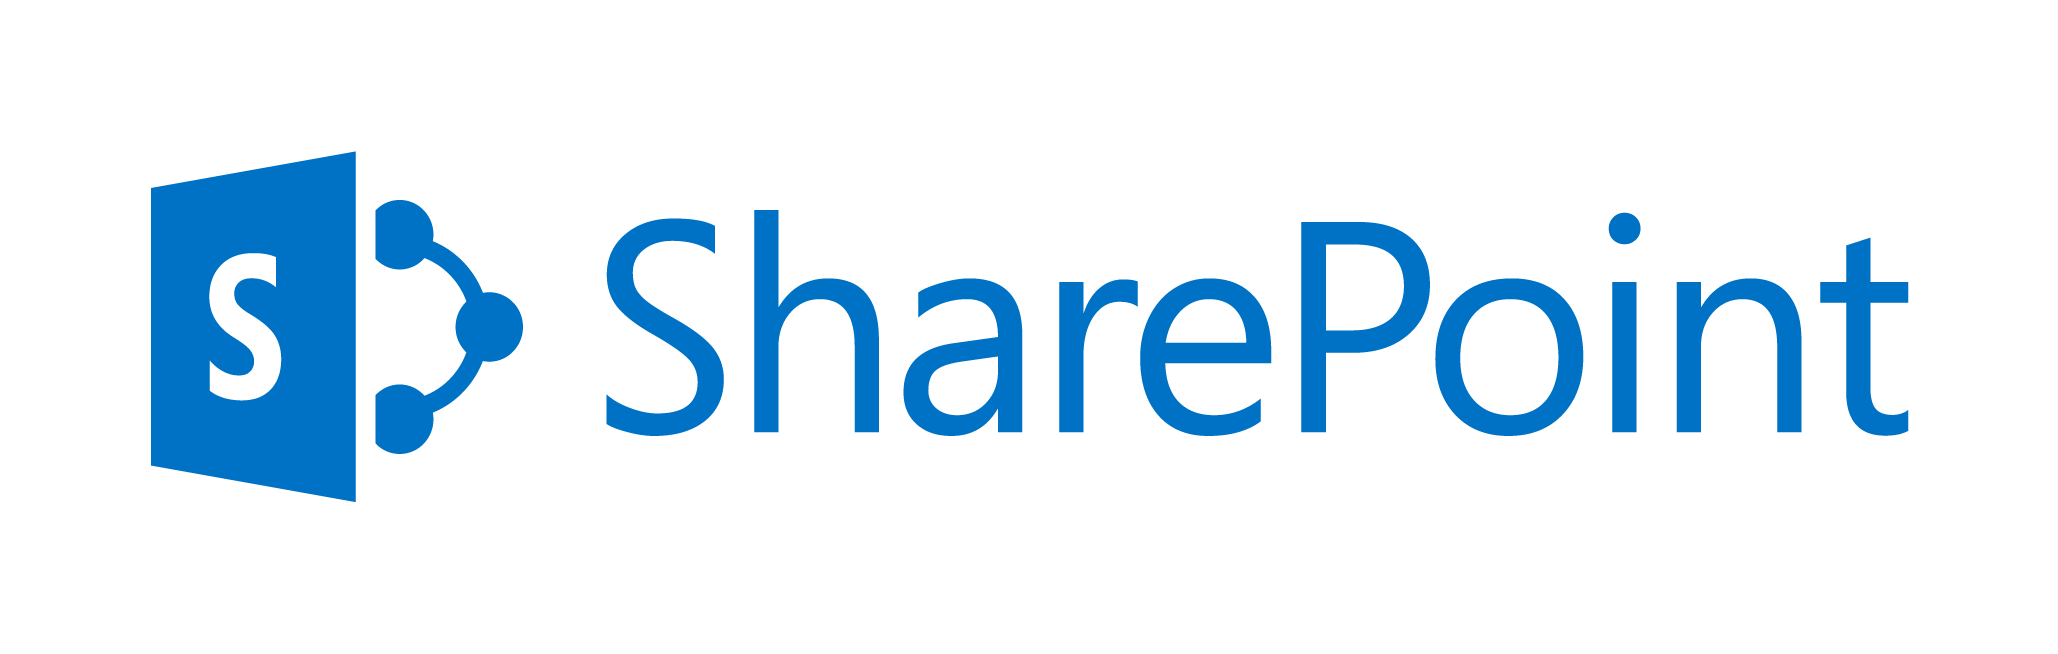 SharePoint DigEplan partner fully integrated electronic plan review